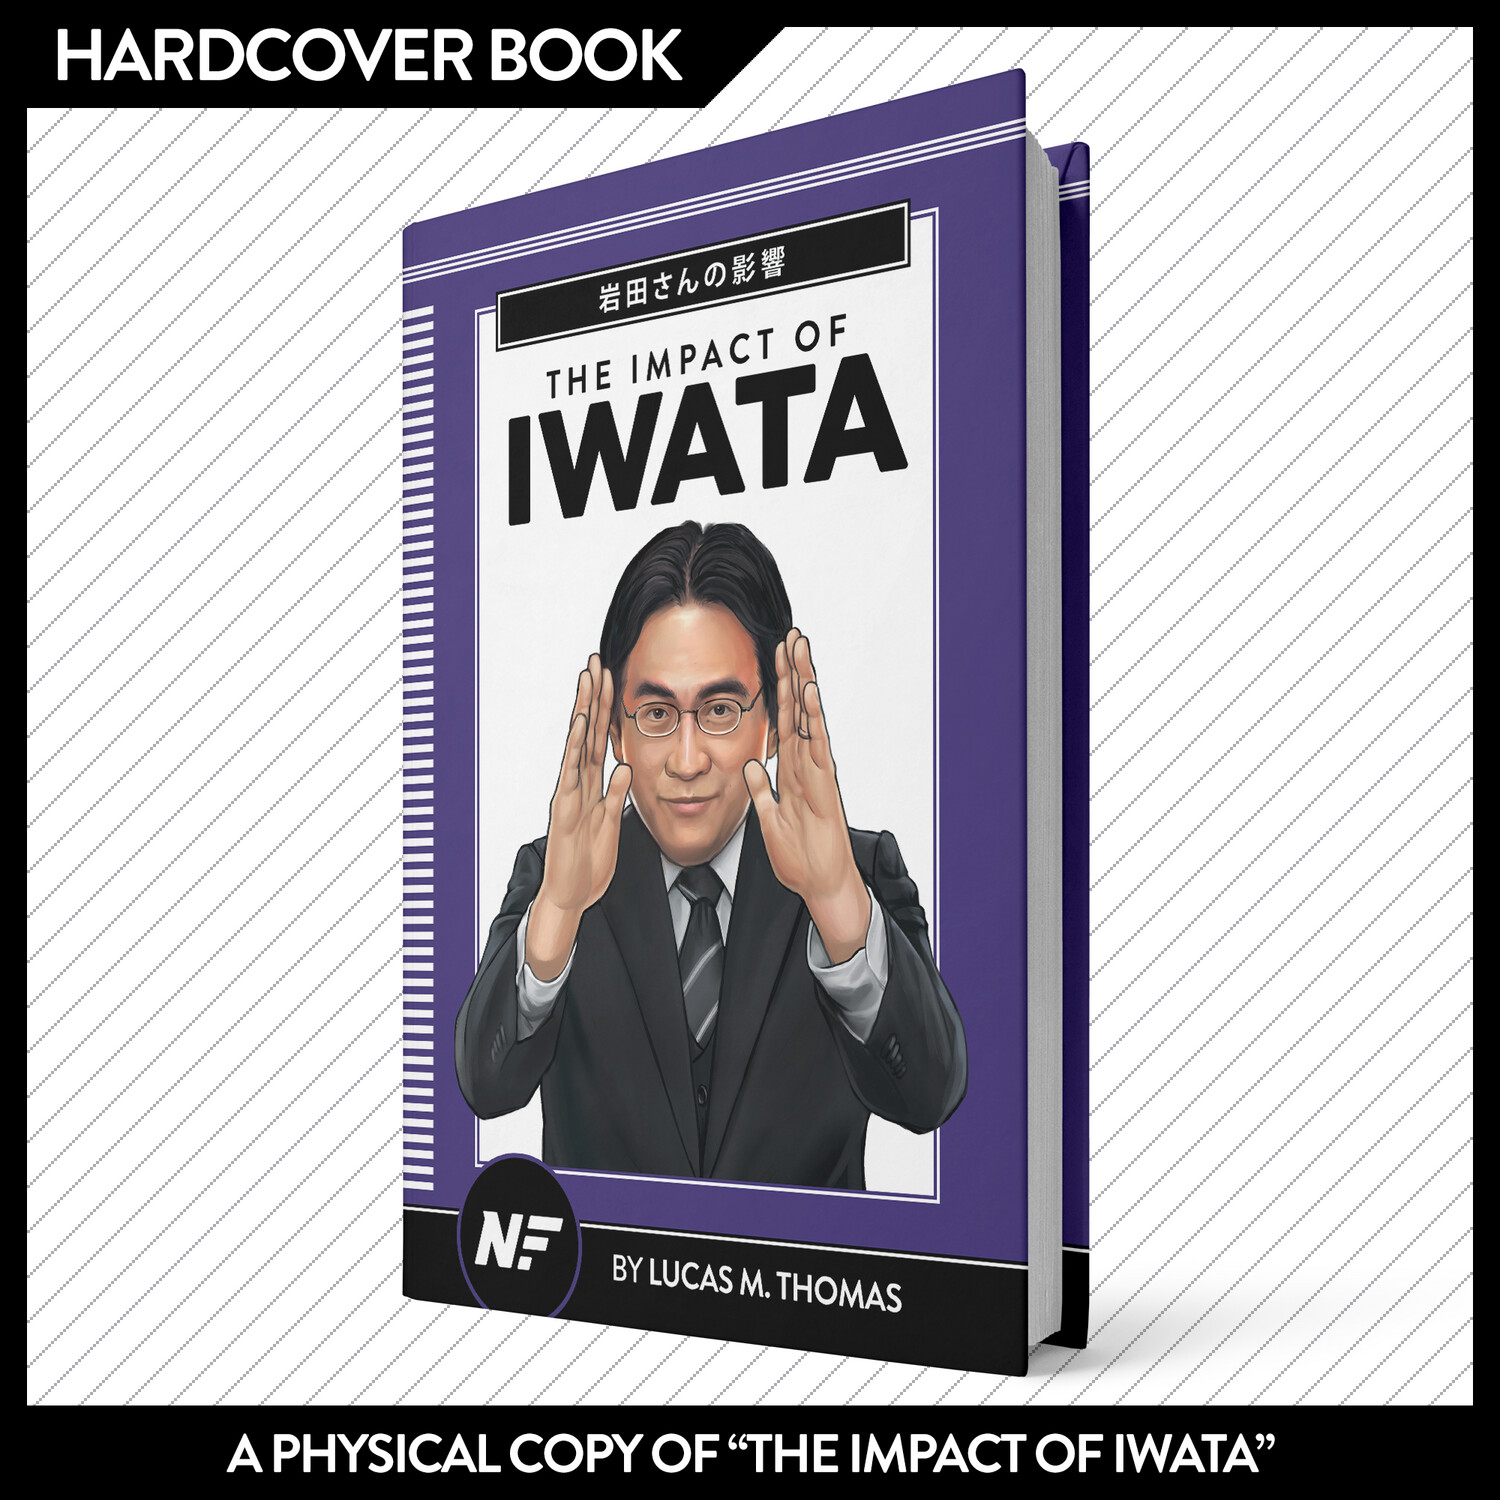 The Impact of Iwata - Hardcover Book